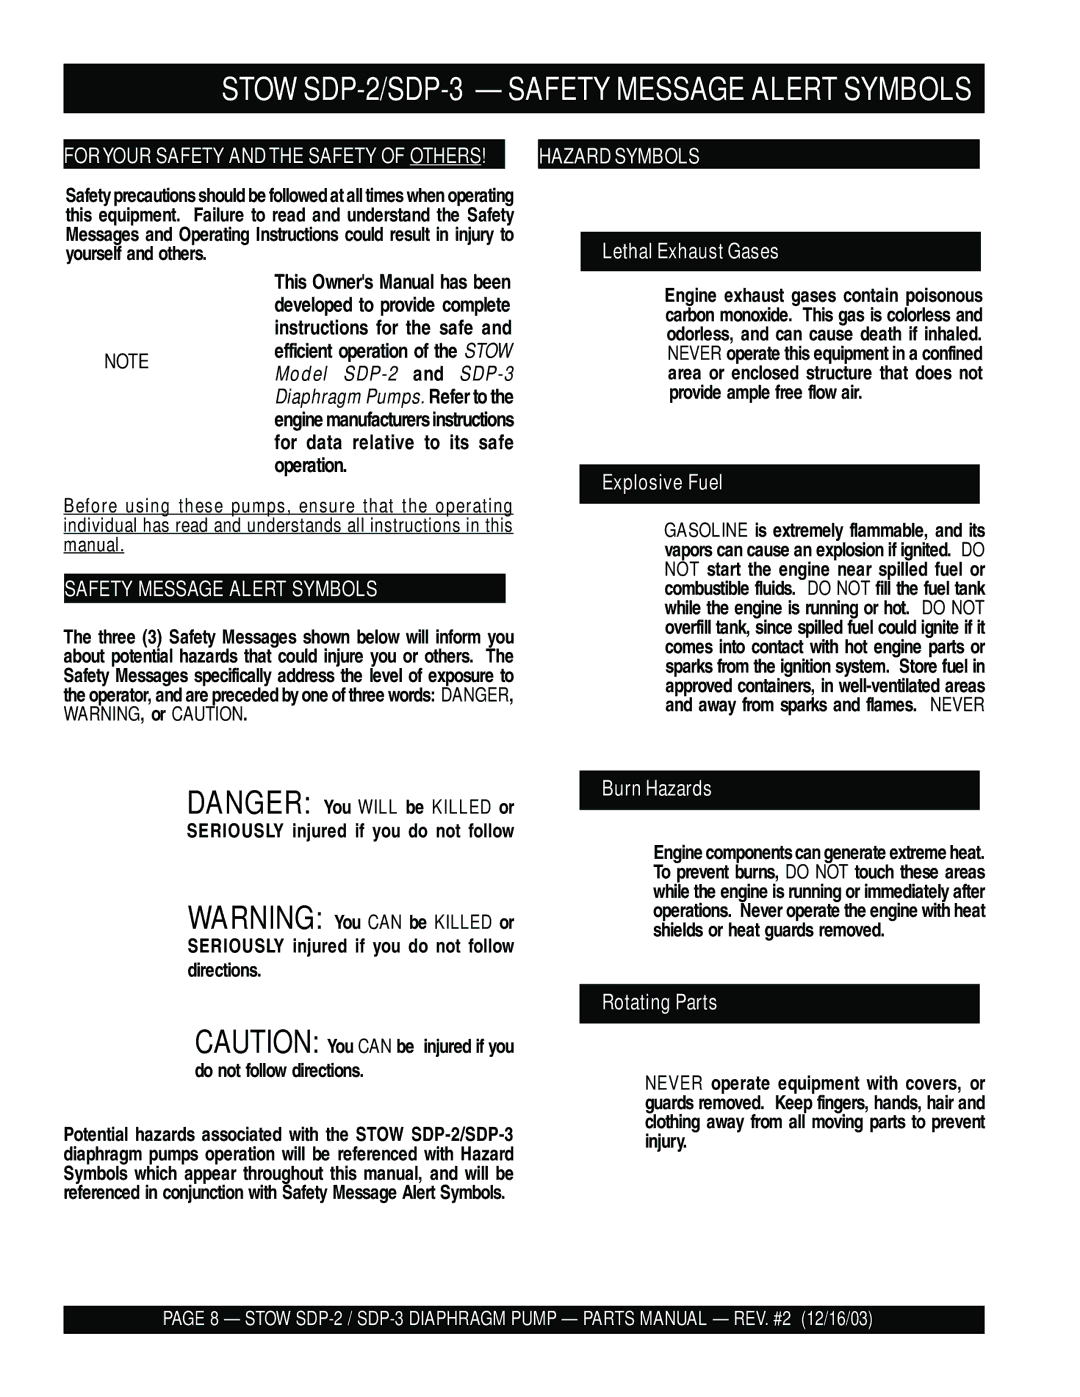 Stow manual Stow SDP-2/SDP-3 Safety Message Alert Symbols 